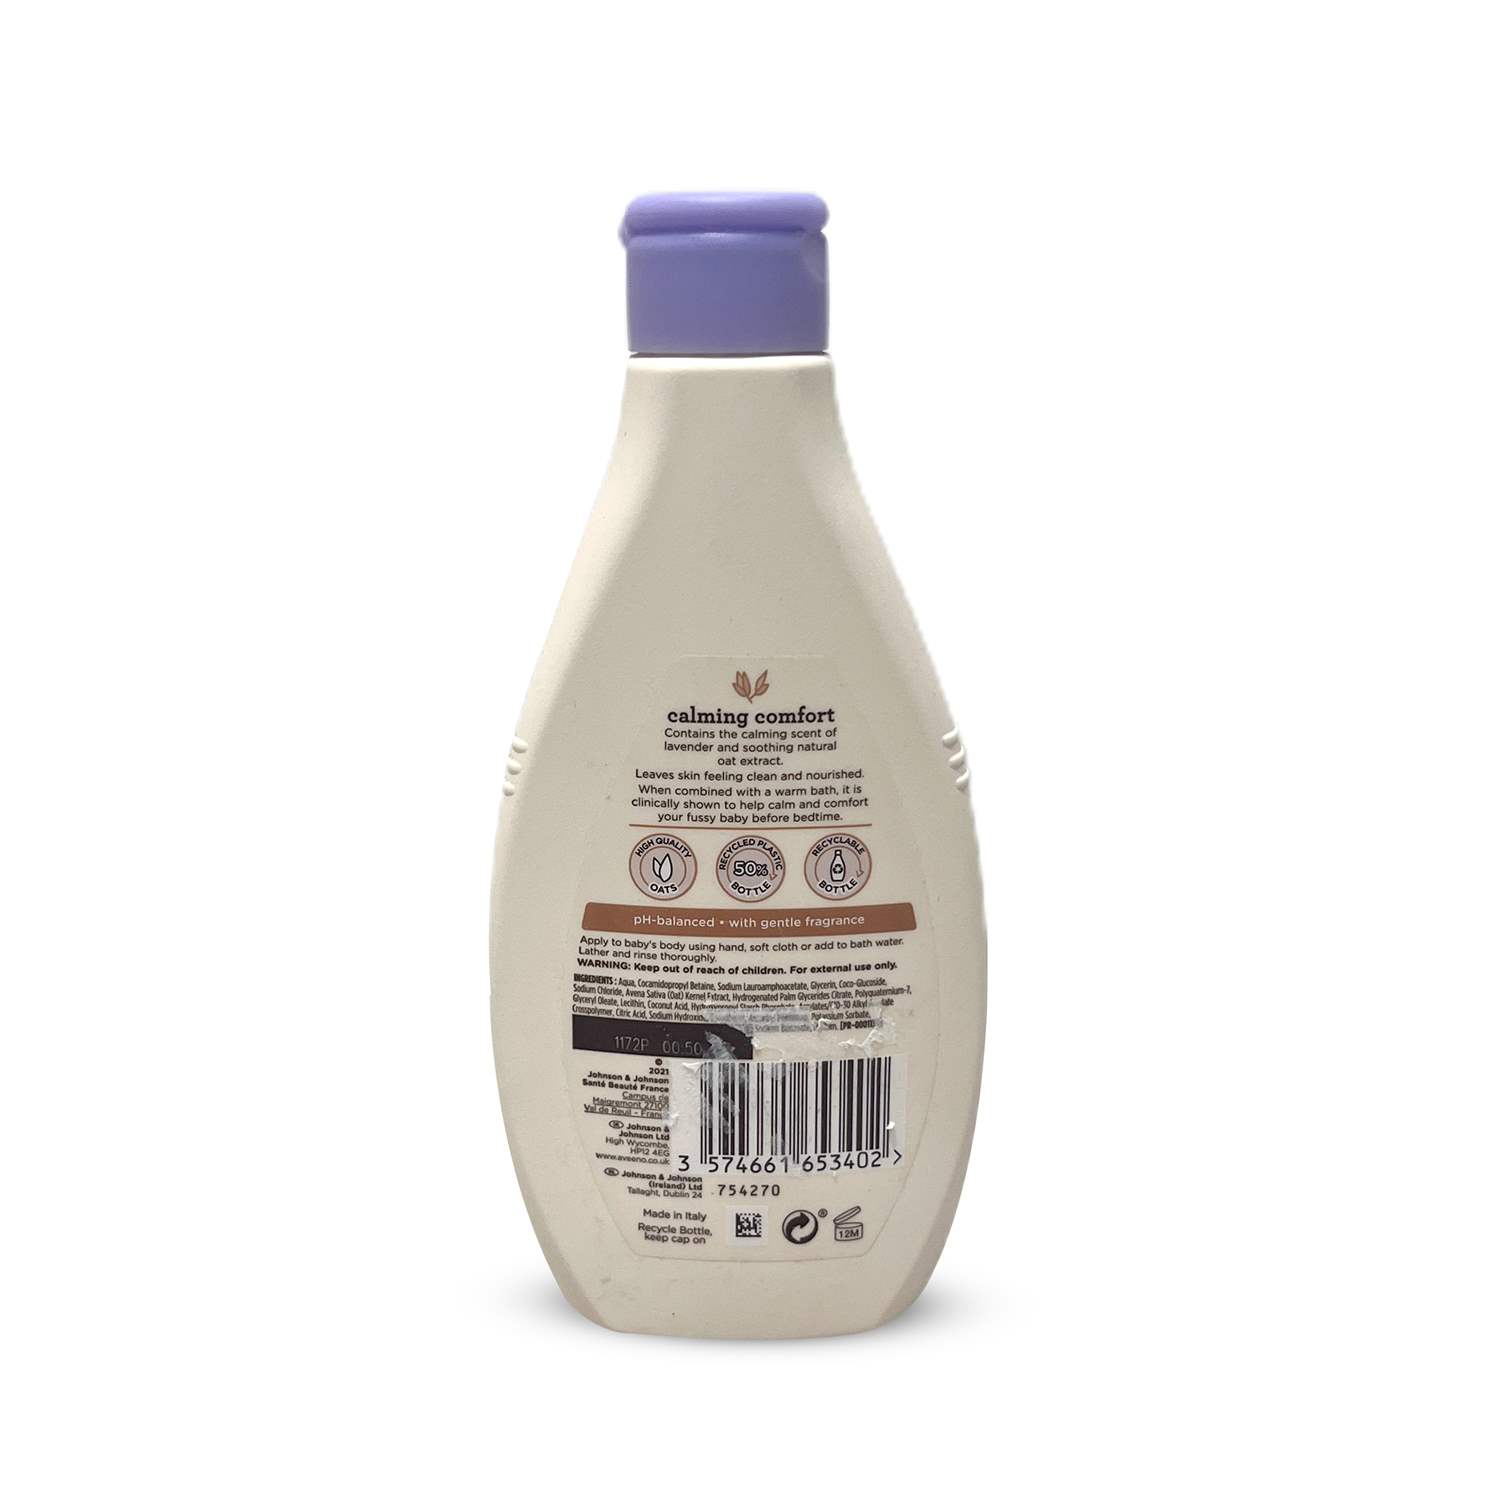 Buy Aveeno Baby Calming Comfort Bed Time Lotion - 250ml Online in India at uyyaala.com